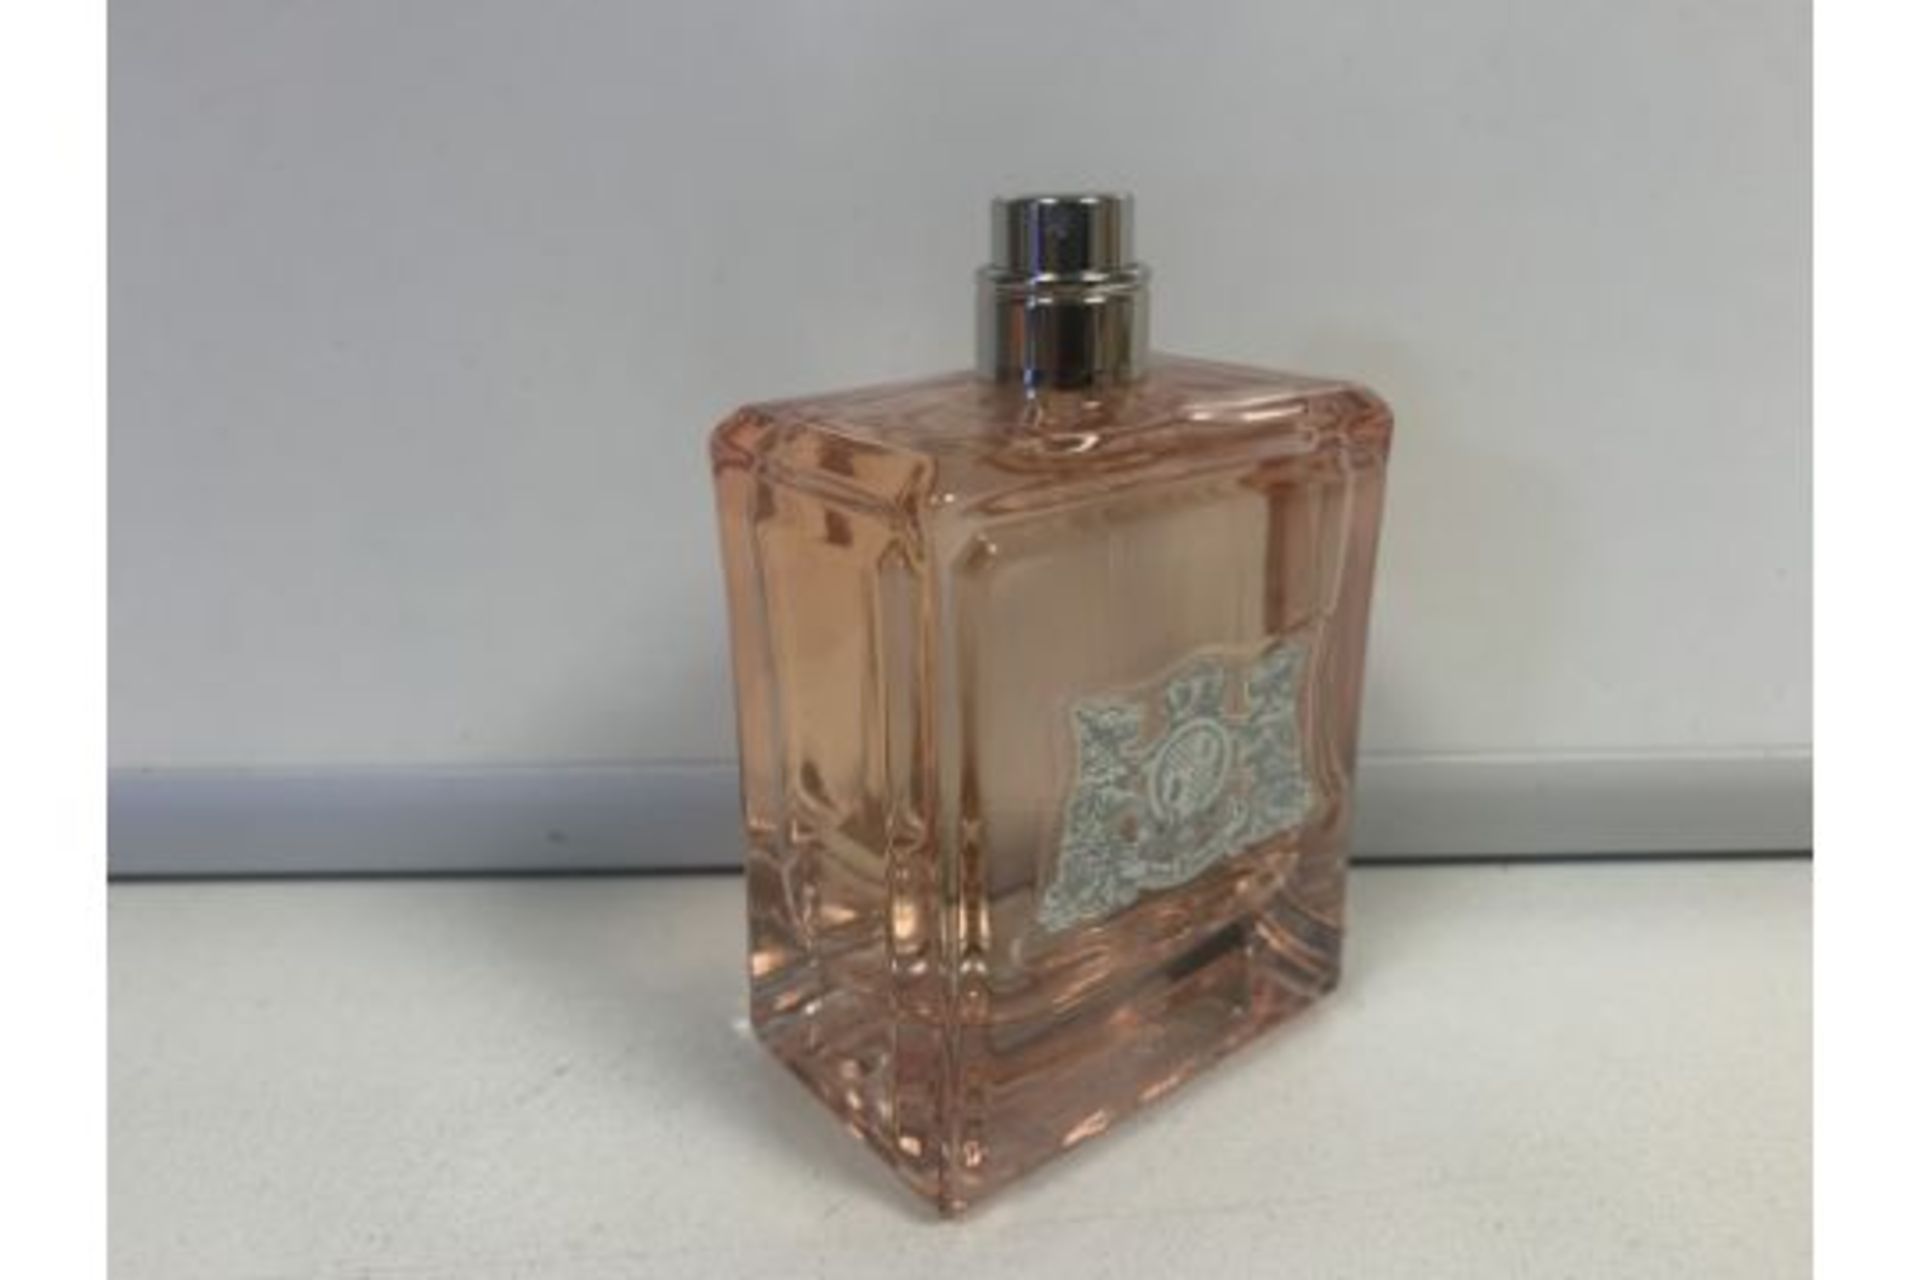 1 X TESTER 90-100% FULL BOTTLE JUICY COUTURE EDP 100ML